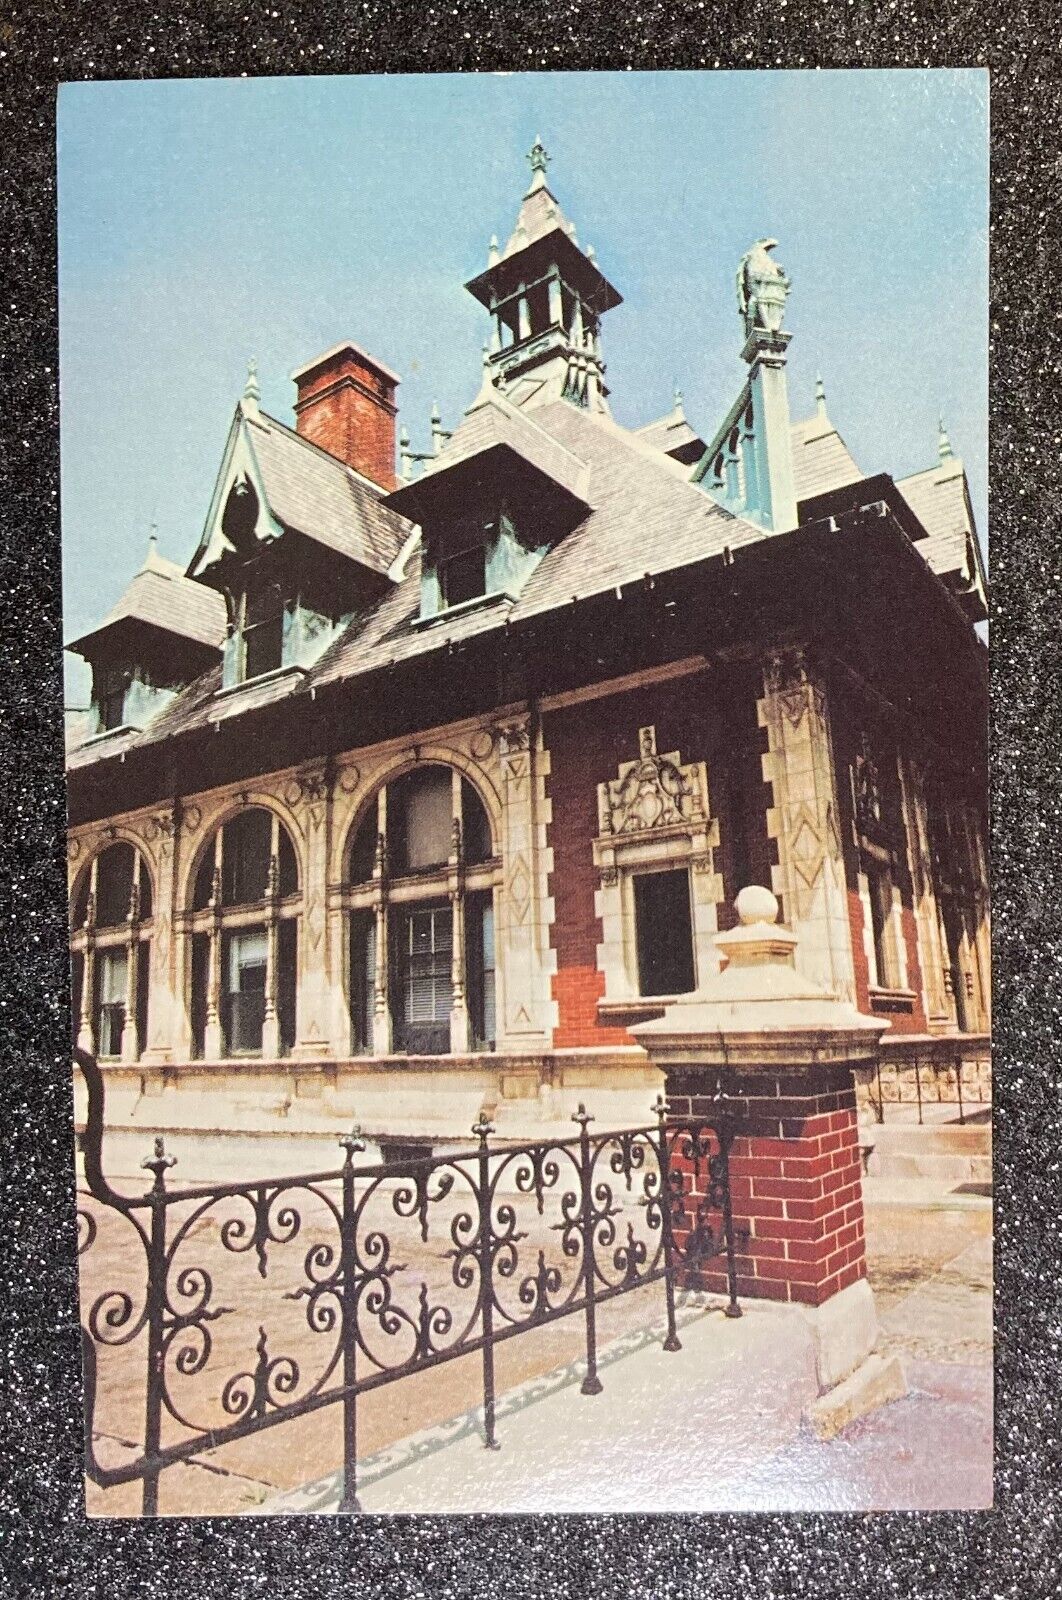 1985 Clarksville, Tennessee Postcard County Historical Museum--National Register